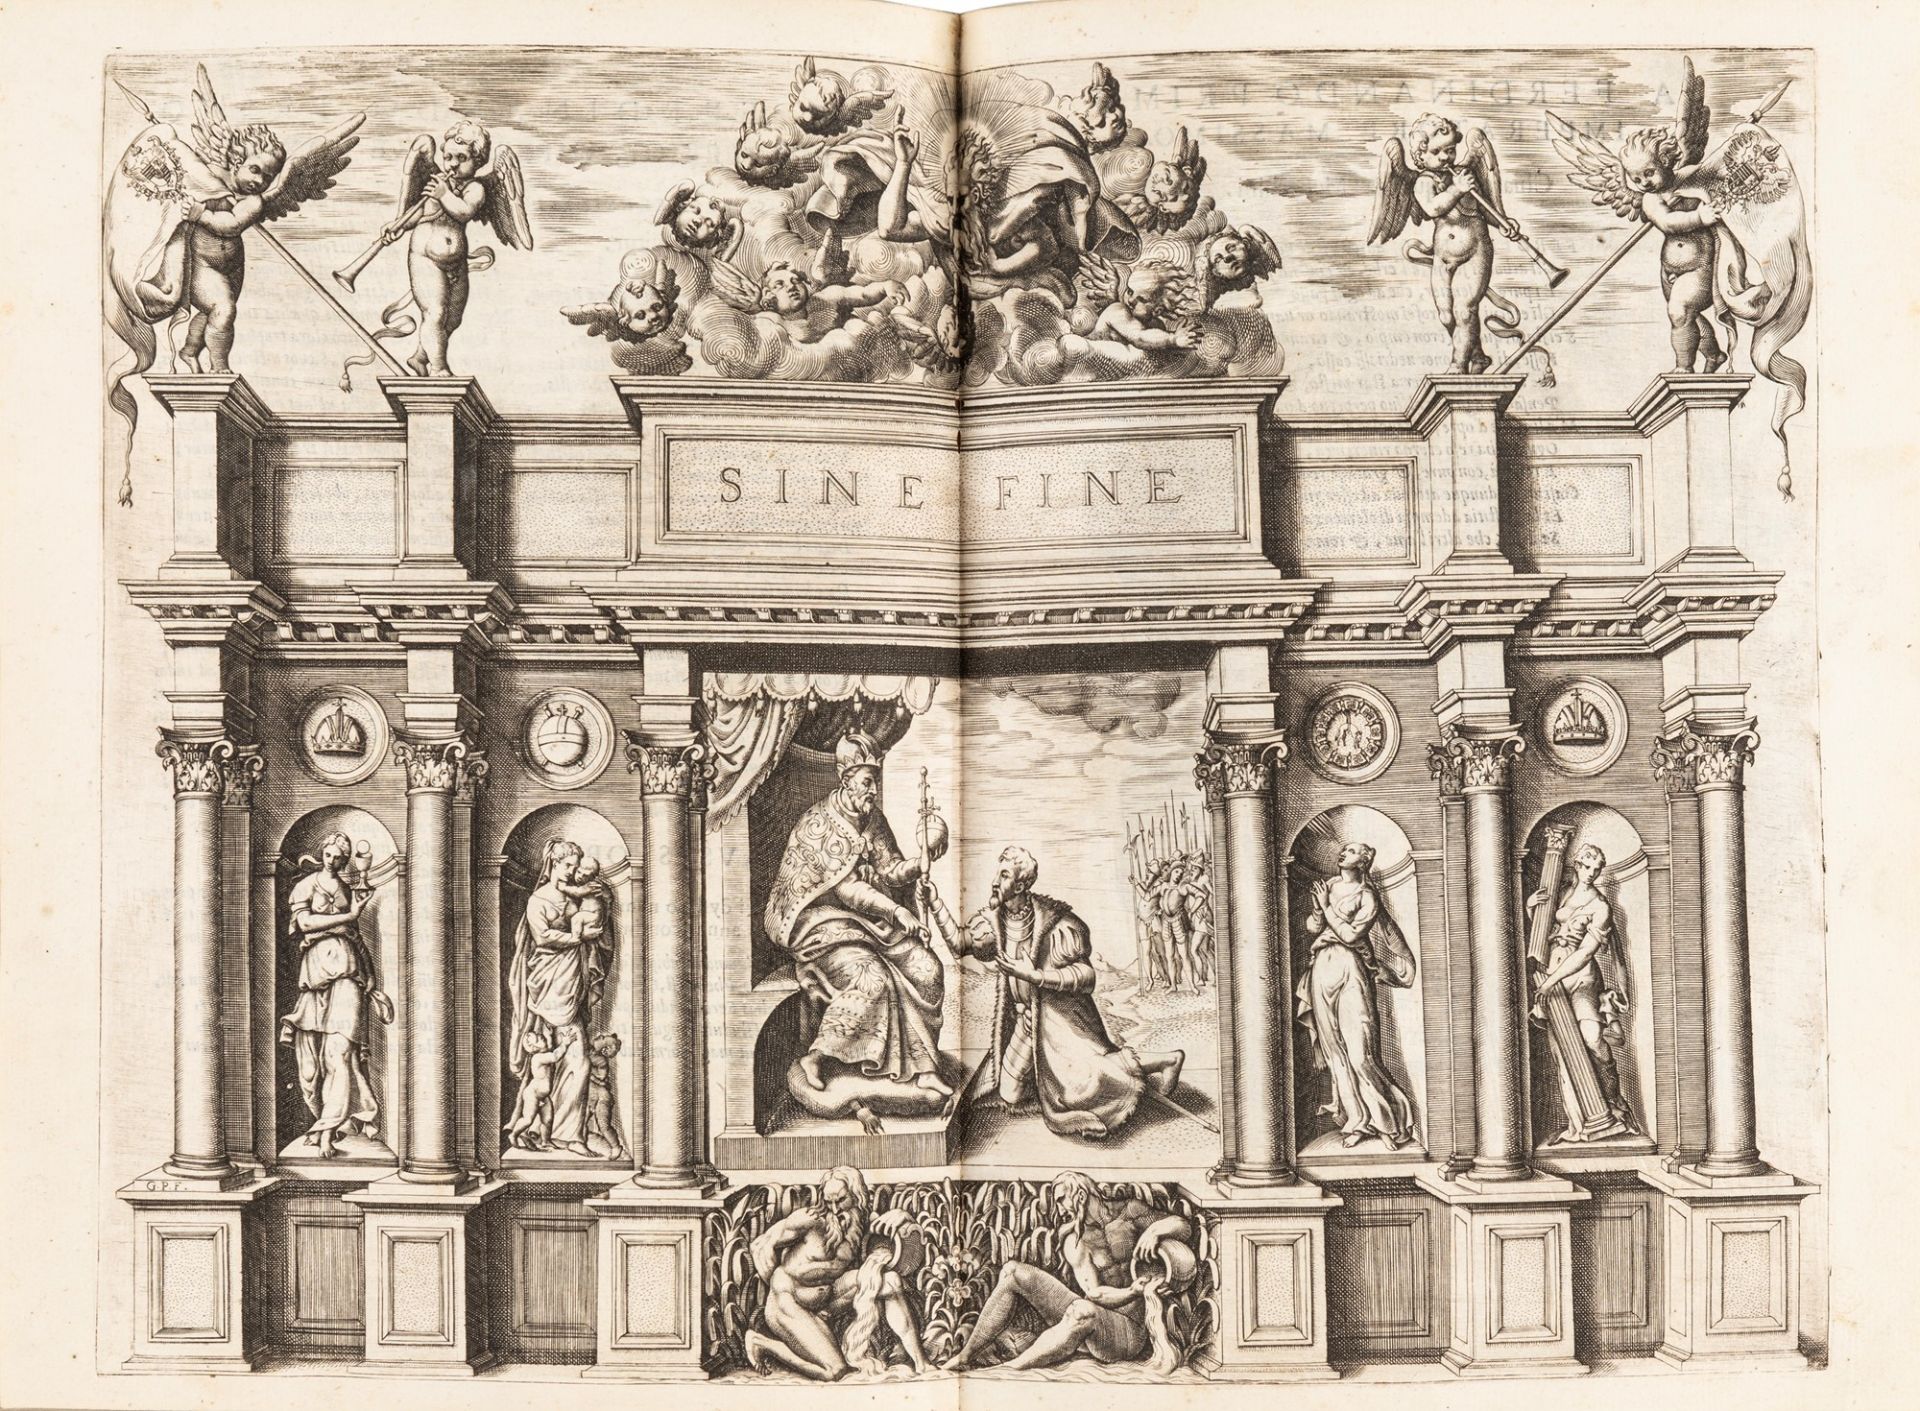 Emblemata - Ruscelli, Girolamo - Illustrious companies with exhibitions, and speeches by S.or Ieroni - Image 2 of 5